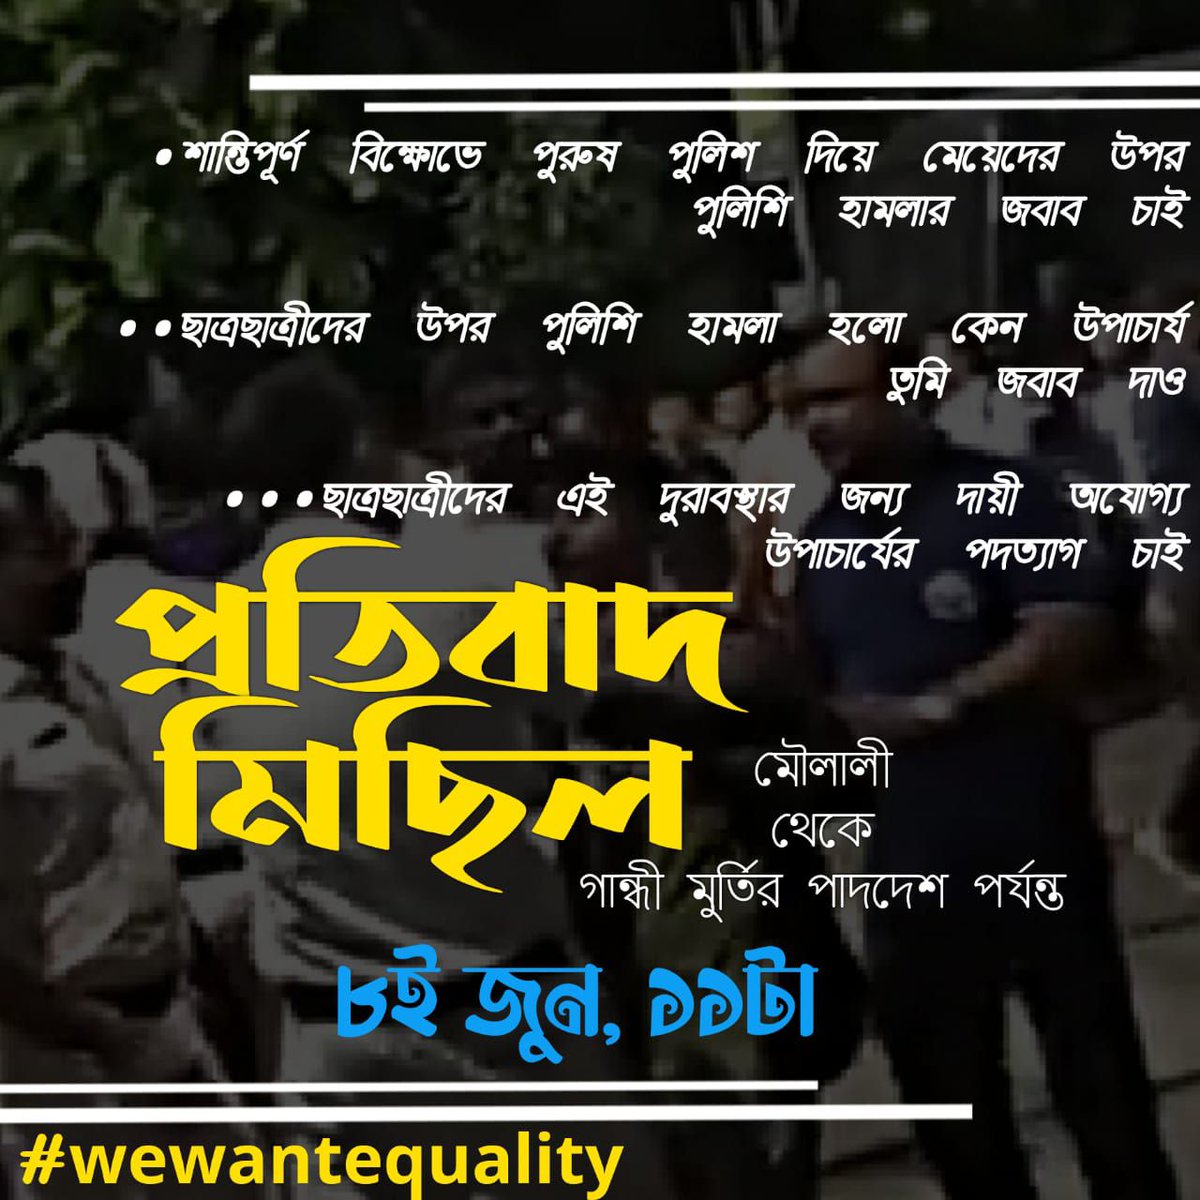 We need mass gathering at Moulali, plz come forward & participate in the movement. Plz come & fight with us, we've to win 💪🏻✊🏻  #CUDemandsOnlineExam #wewantequality #WeWantOnlineExams #WBDemandsOnlineExam #WeWantOnlineExamsCU #MoulaliRally #WeWantOnlineExam2022